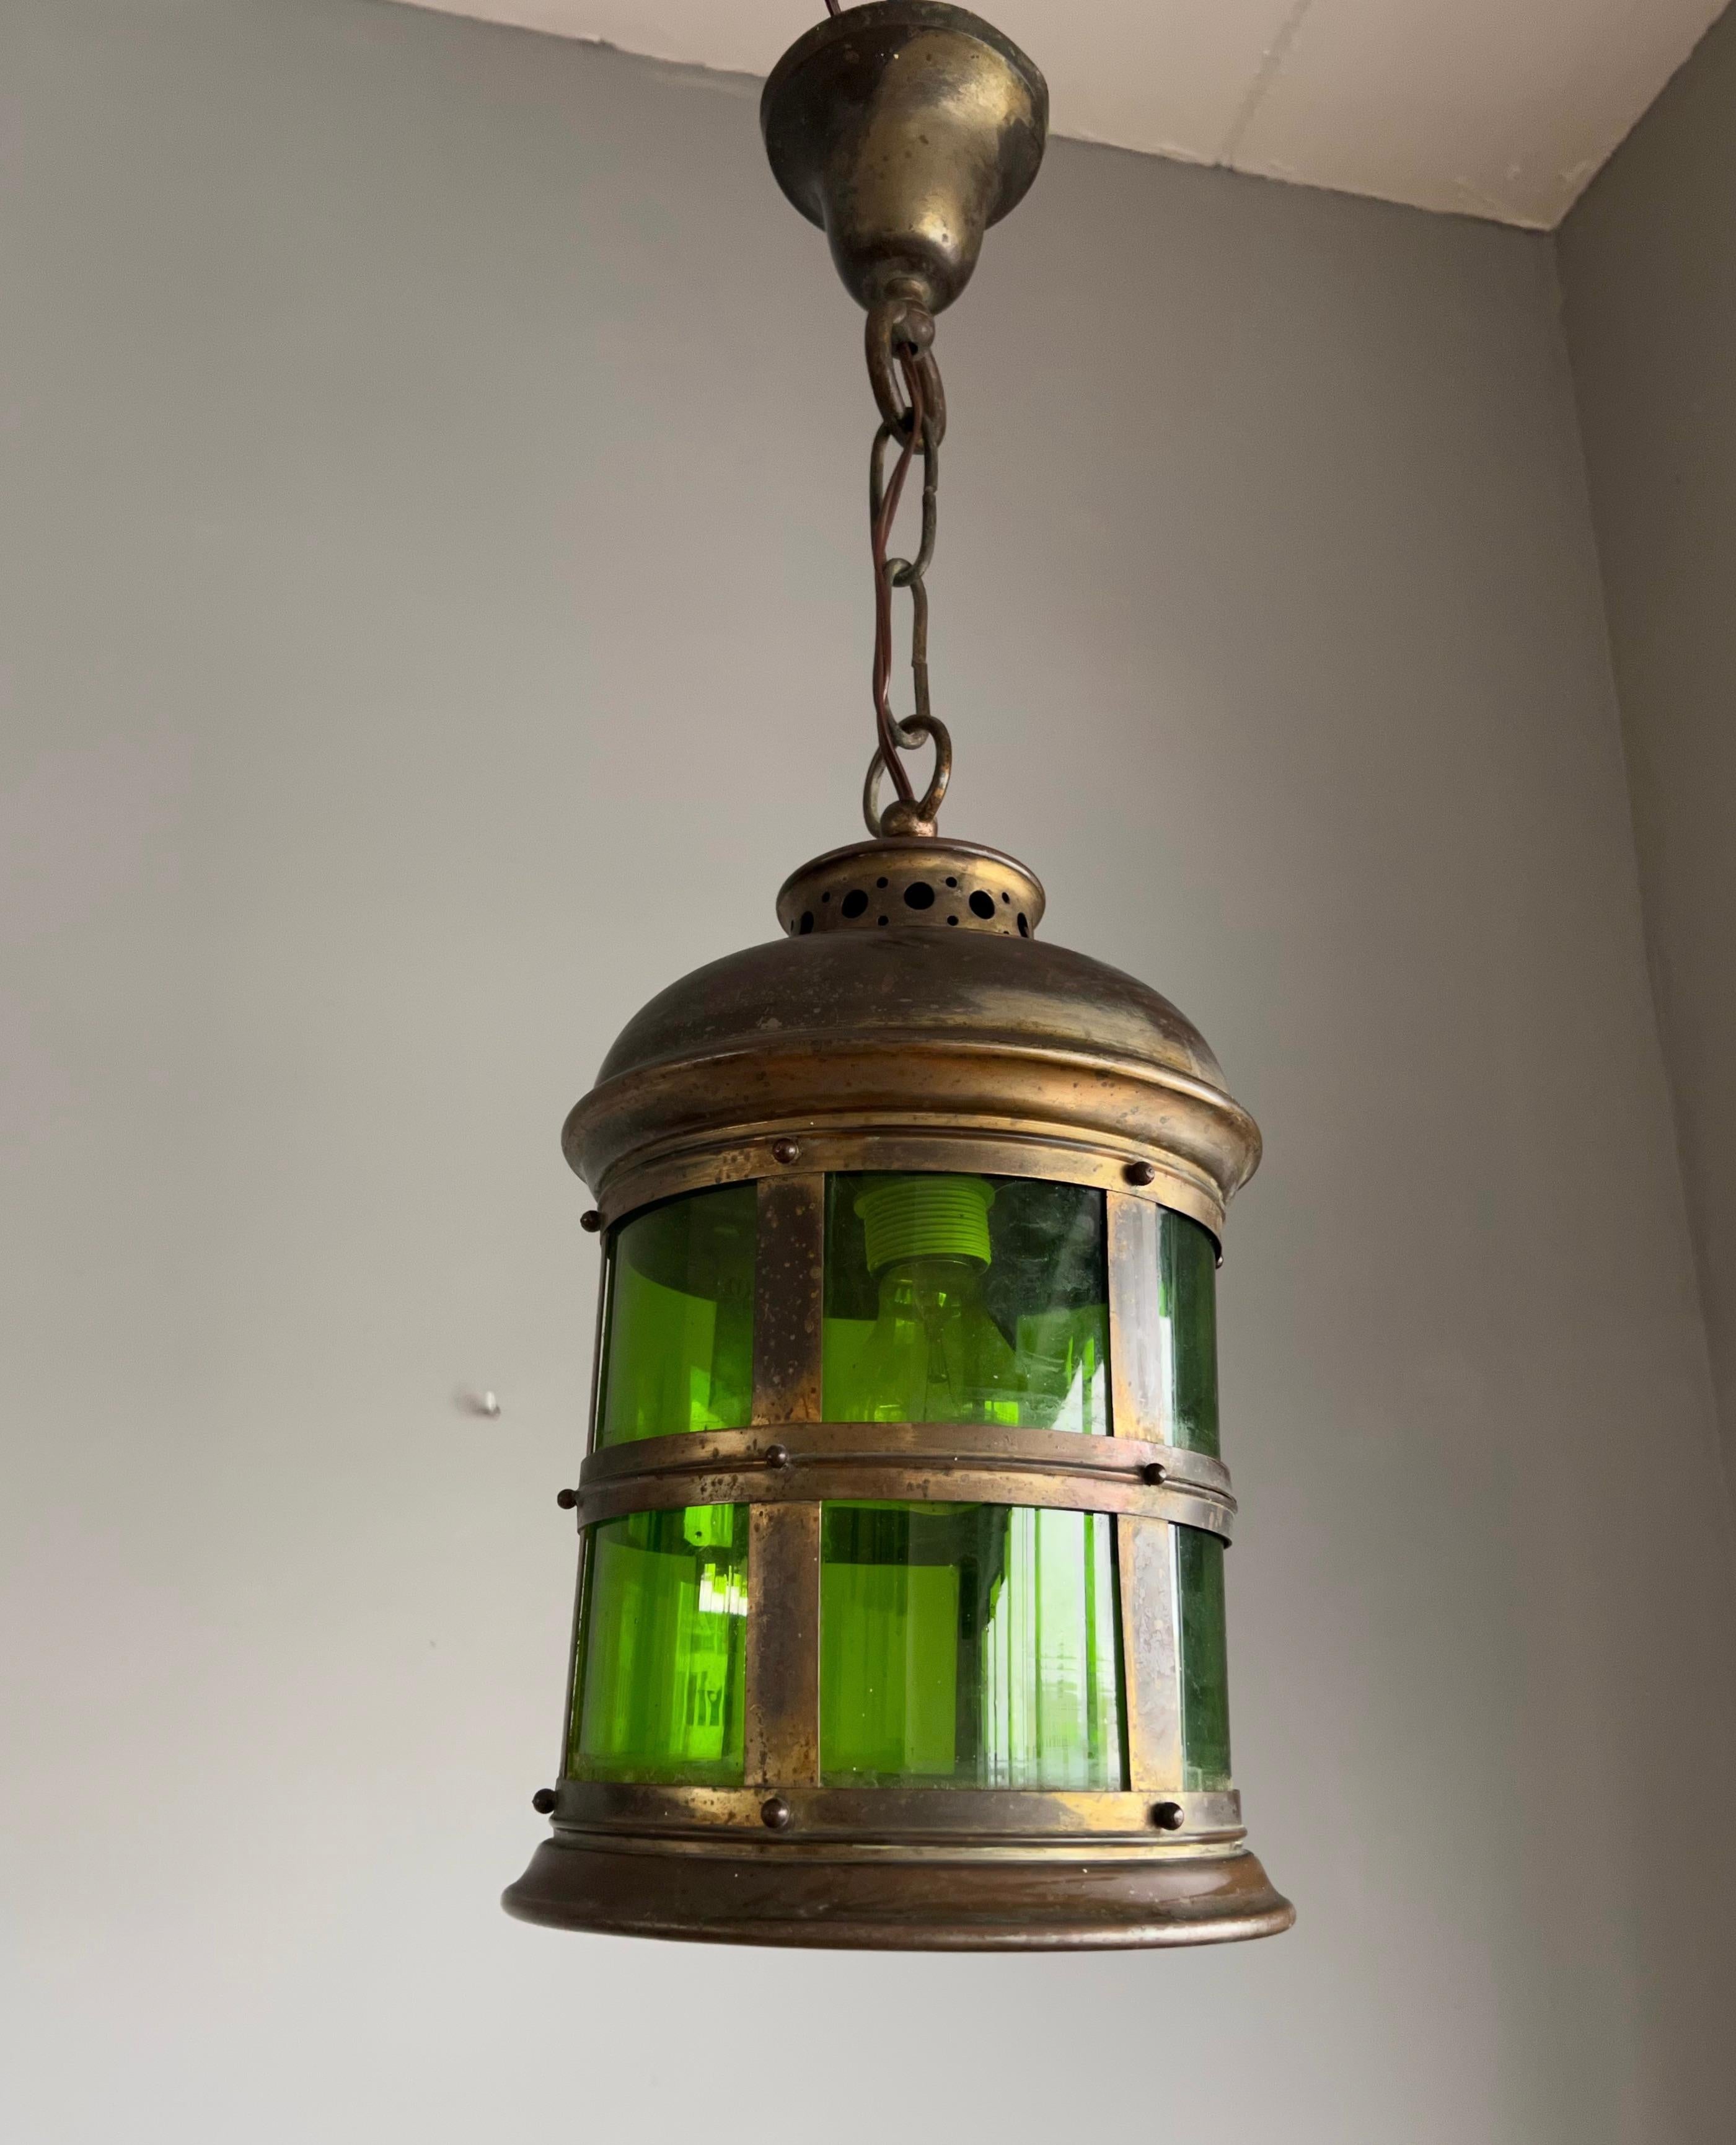 Unique and all handcrafted, round pendant light / fixture.

If you are looking for a stylish and quality crafted antique lantern to grace your entry hall, landing or bedroom then this Arts & Crafts beauty could be perfect for you. This early